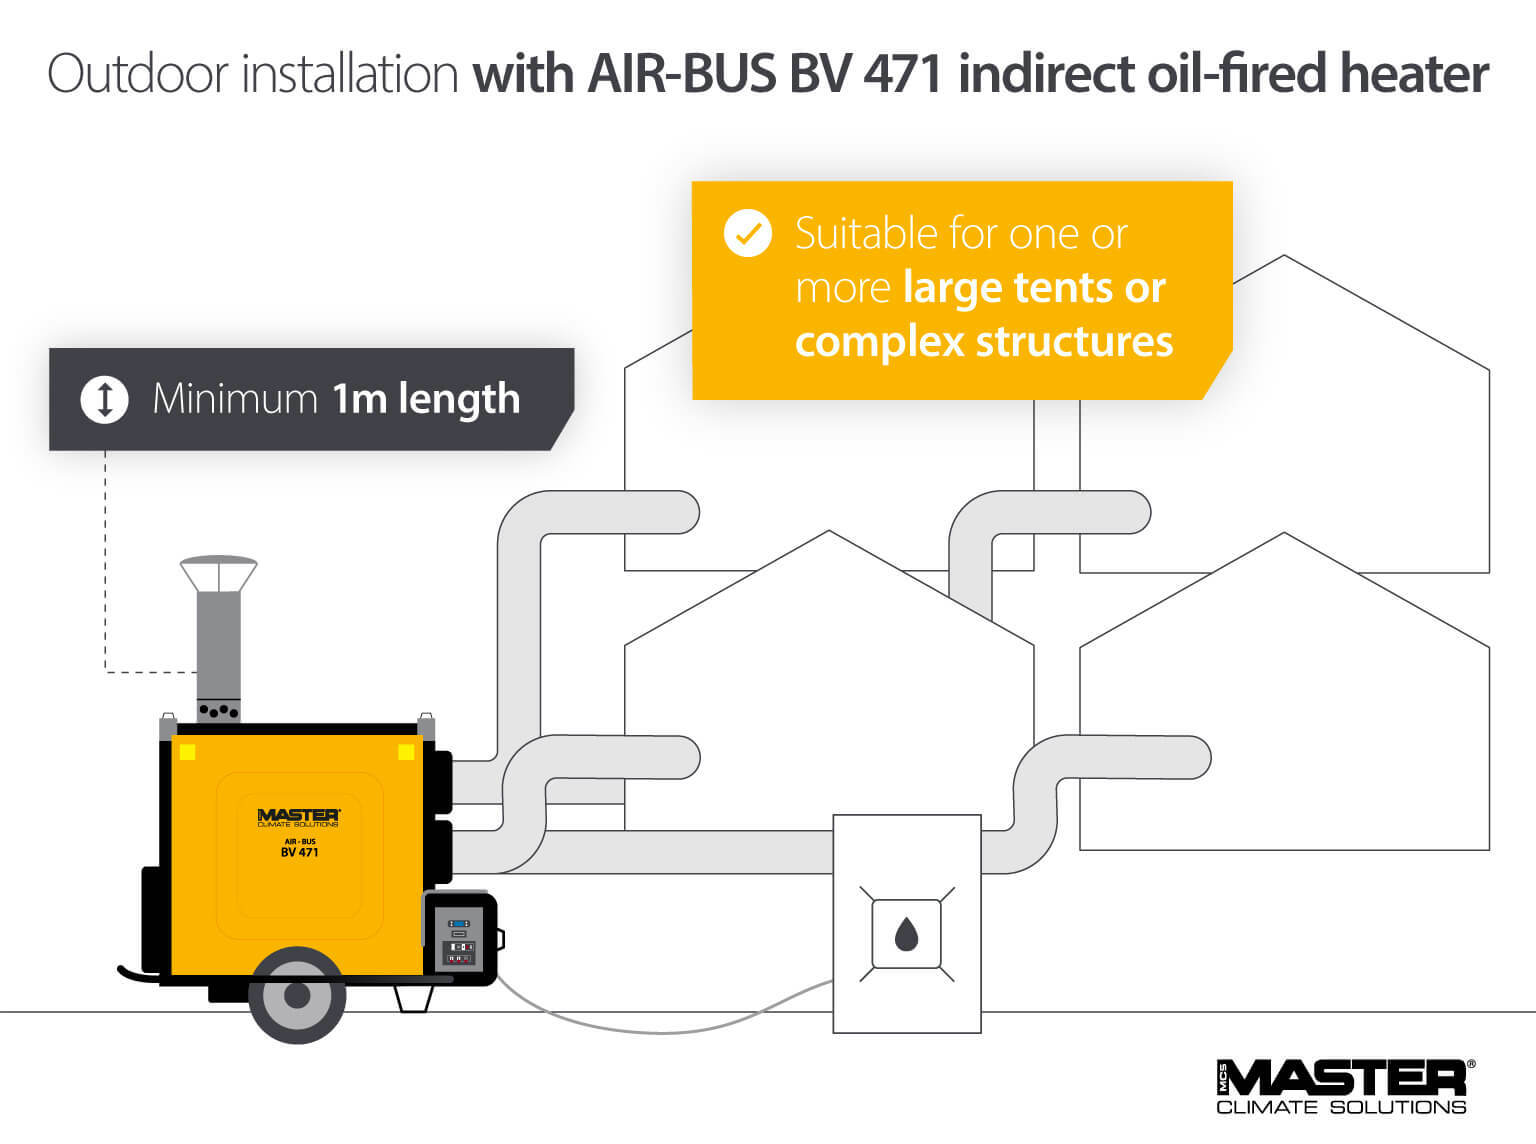 Infographic: Outdoor installation of Master Air-Bus BV 471 Indirect Oil-fired heater. Suitable for one or more large tents or complex structures